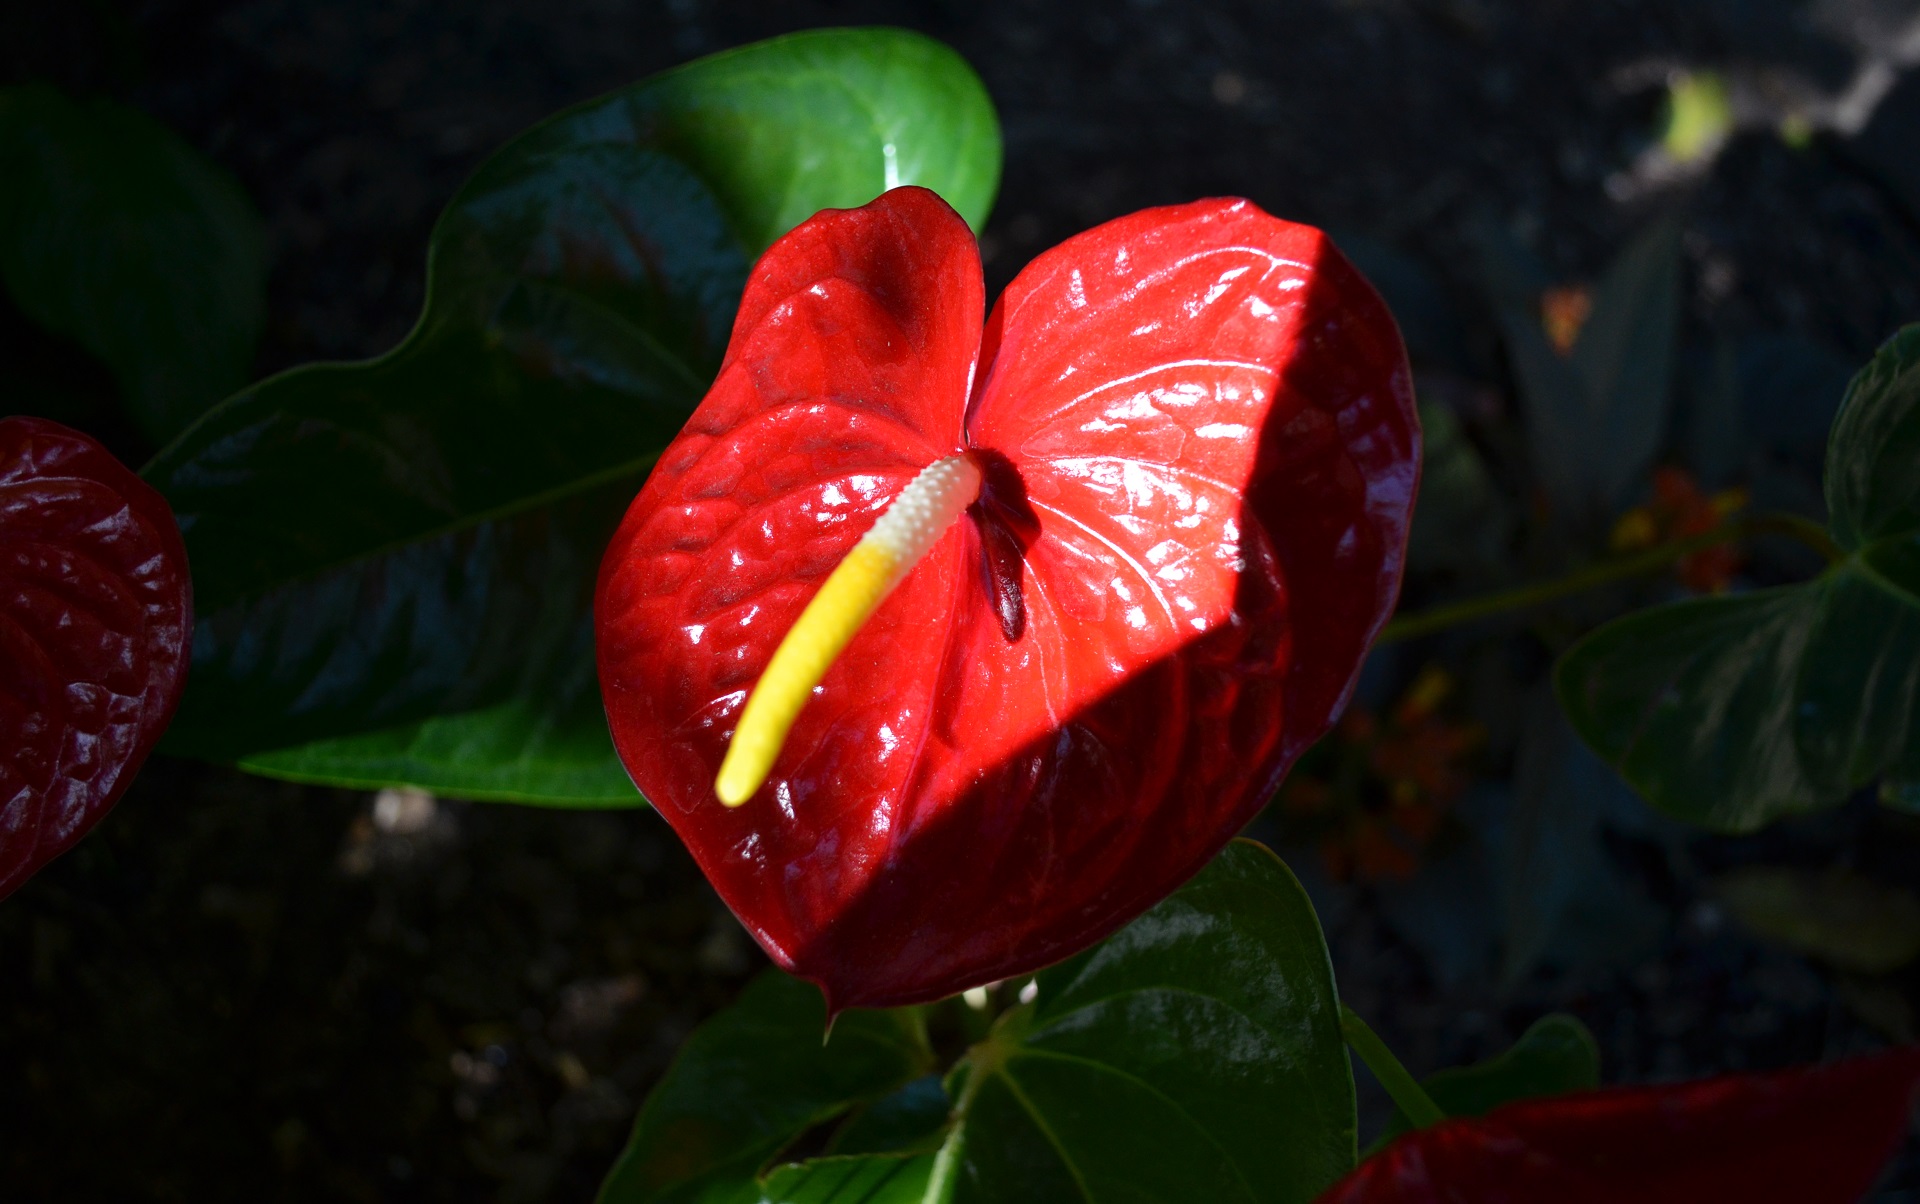 earth, anthurium, flower, nature, plant, red, flowers